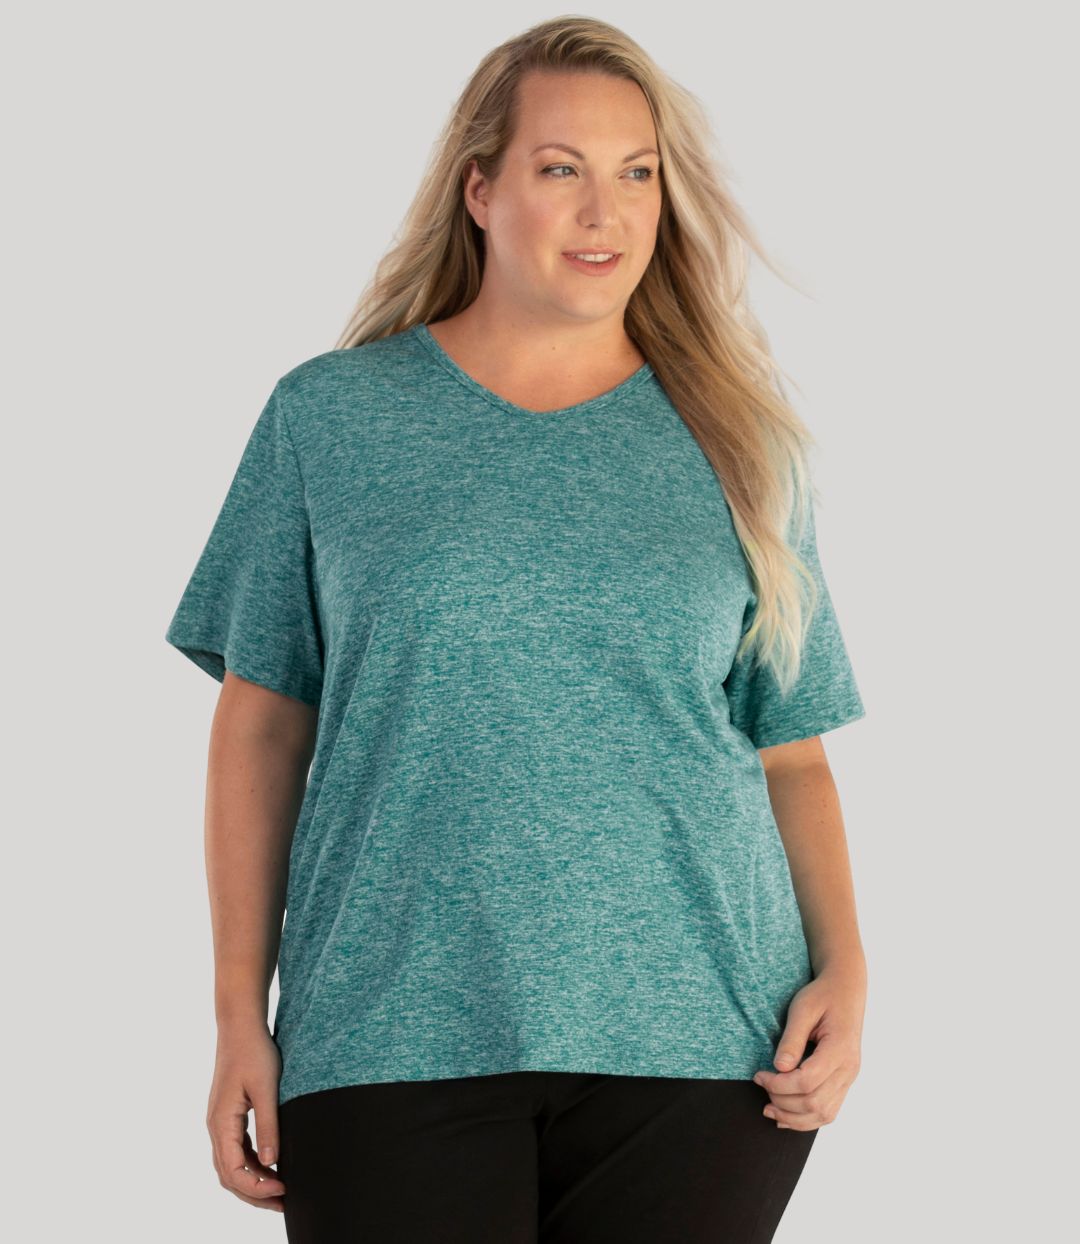 Plus size woman, facing front, wearing JunoActive plus size SoftWik V-Neck Tee in the color Heather Emerald. She is wearing JunoActive Plus Size Leggings in the color Black.